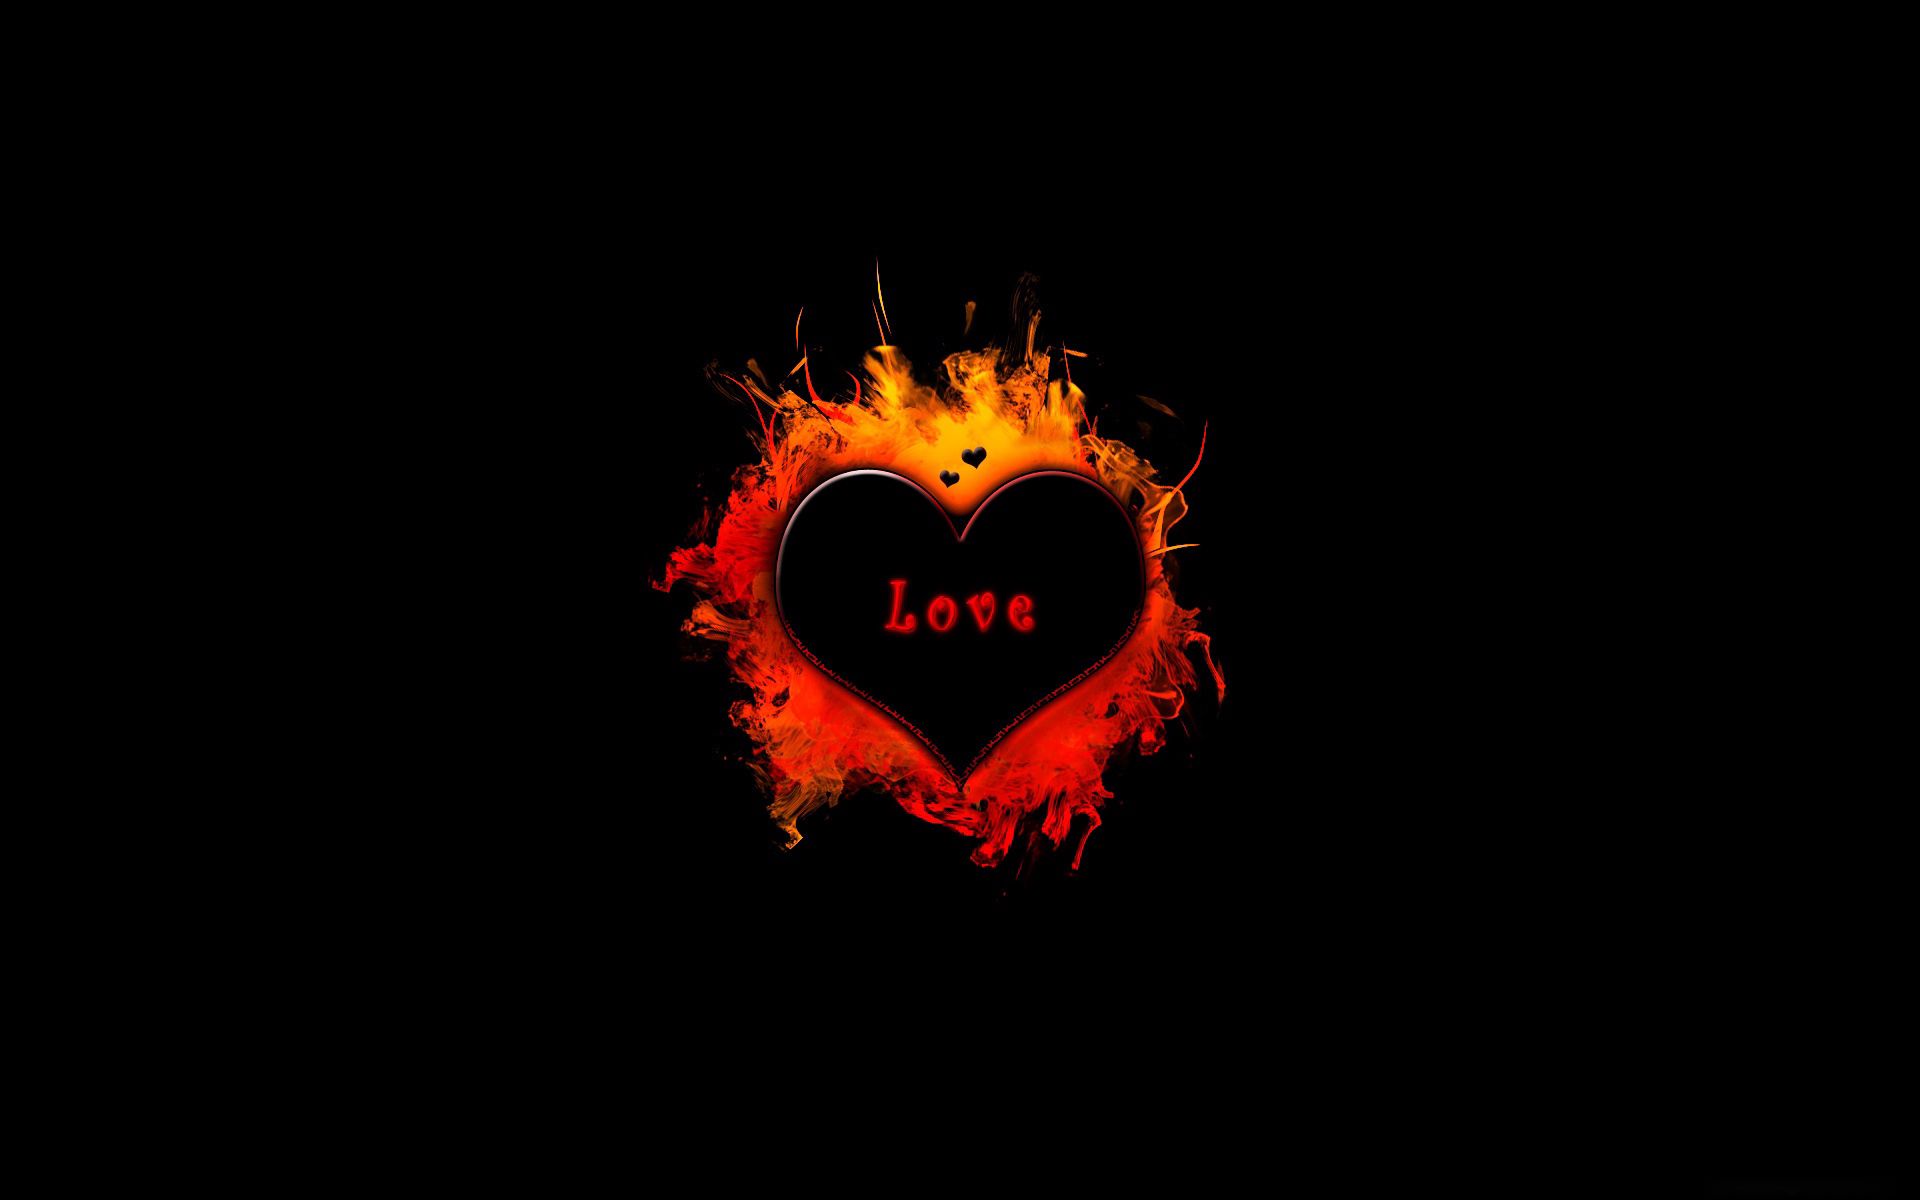 shadow, heart, love, flame, fire wallpapers for tablet